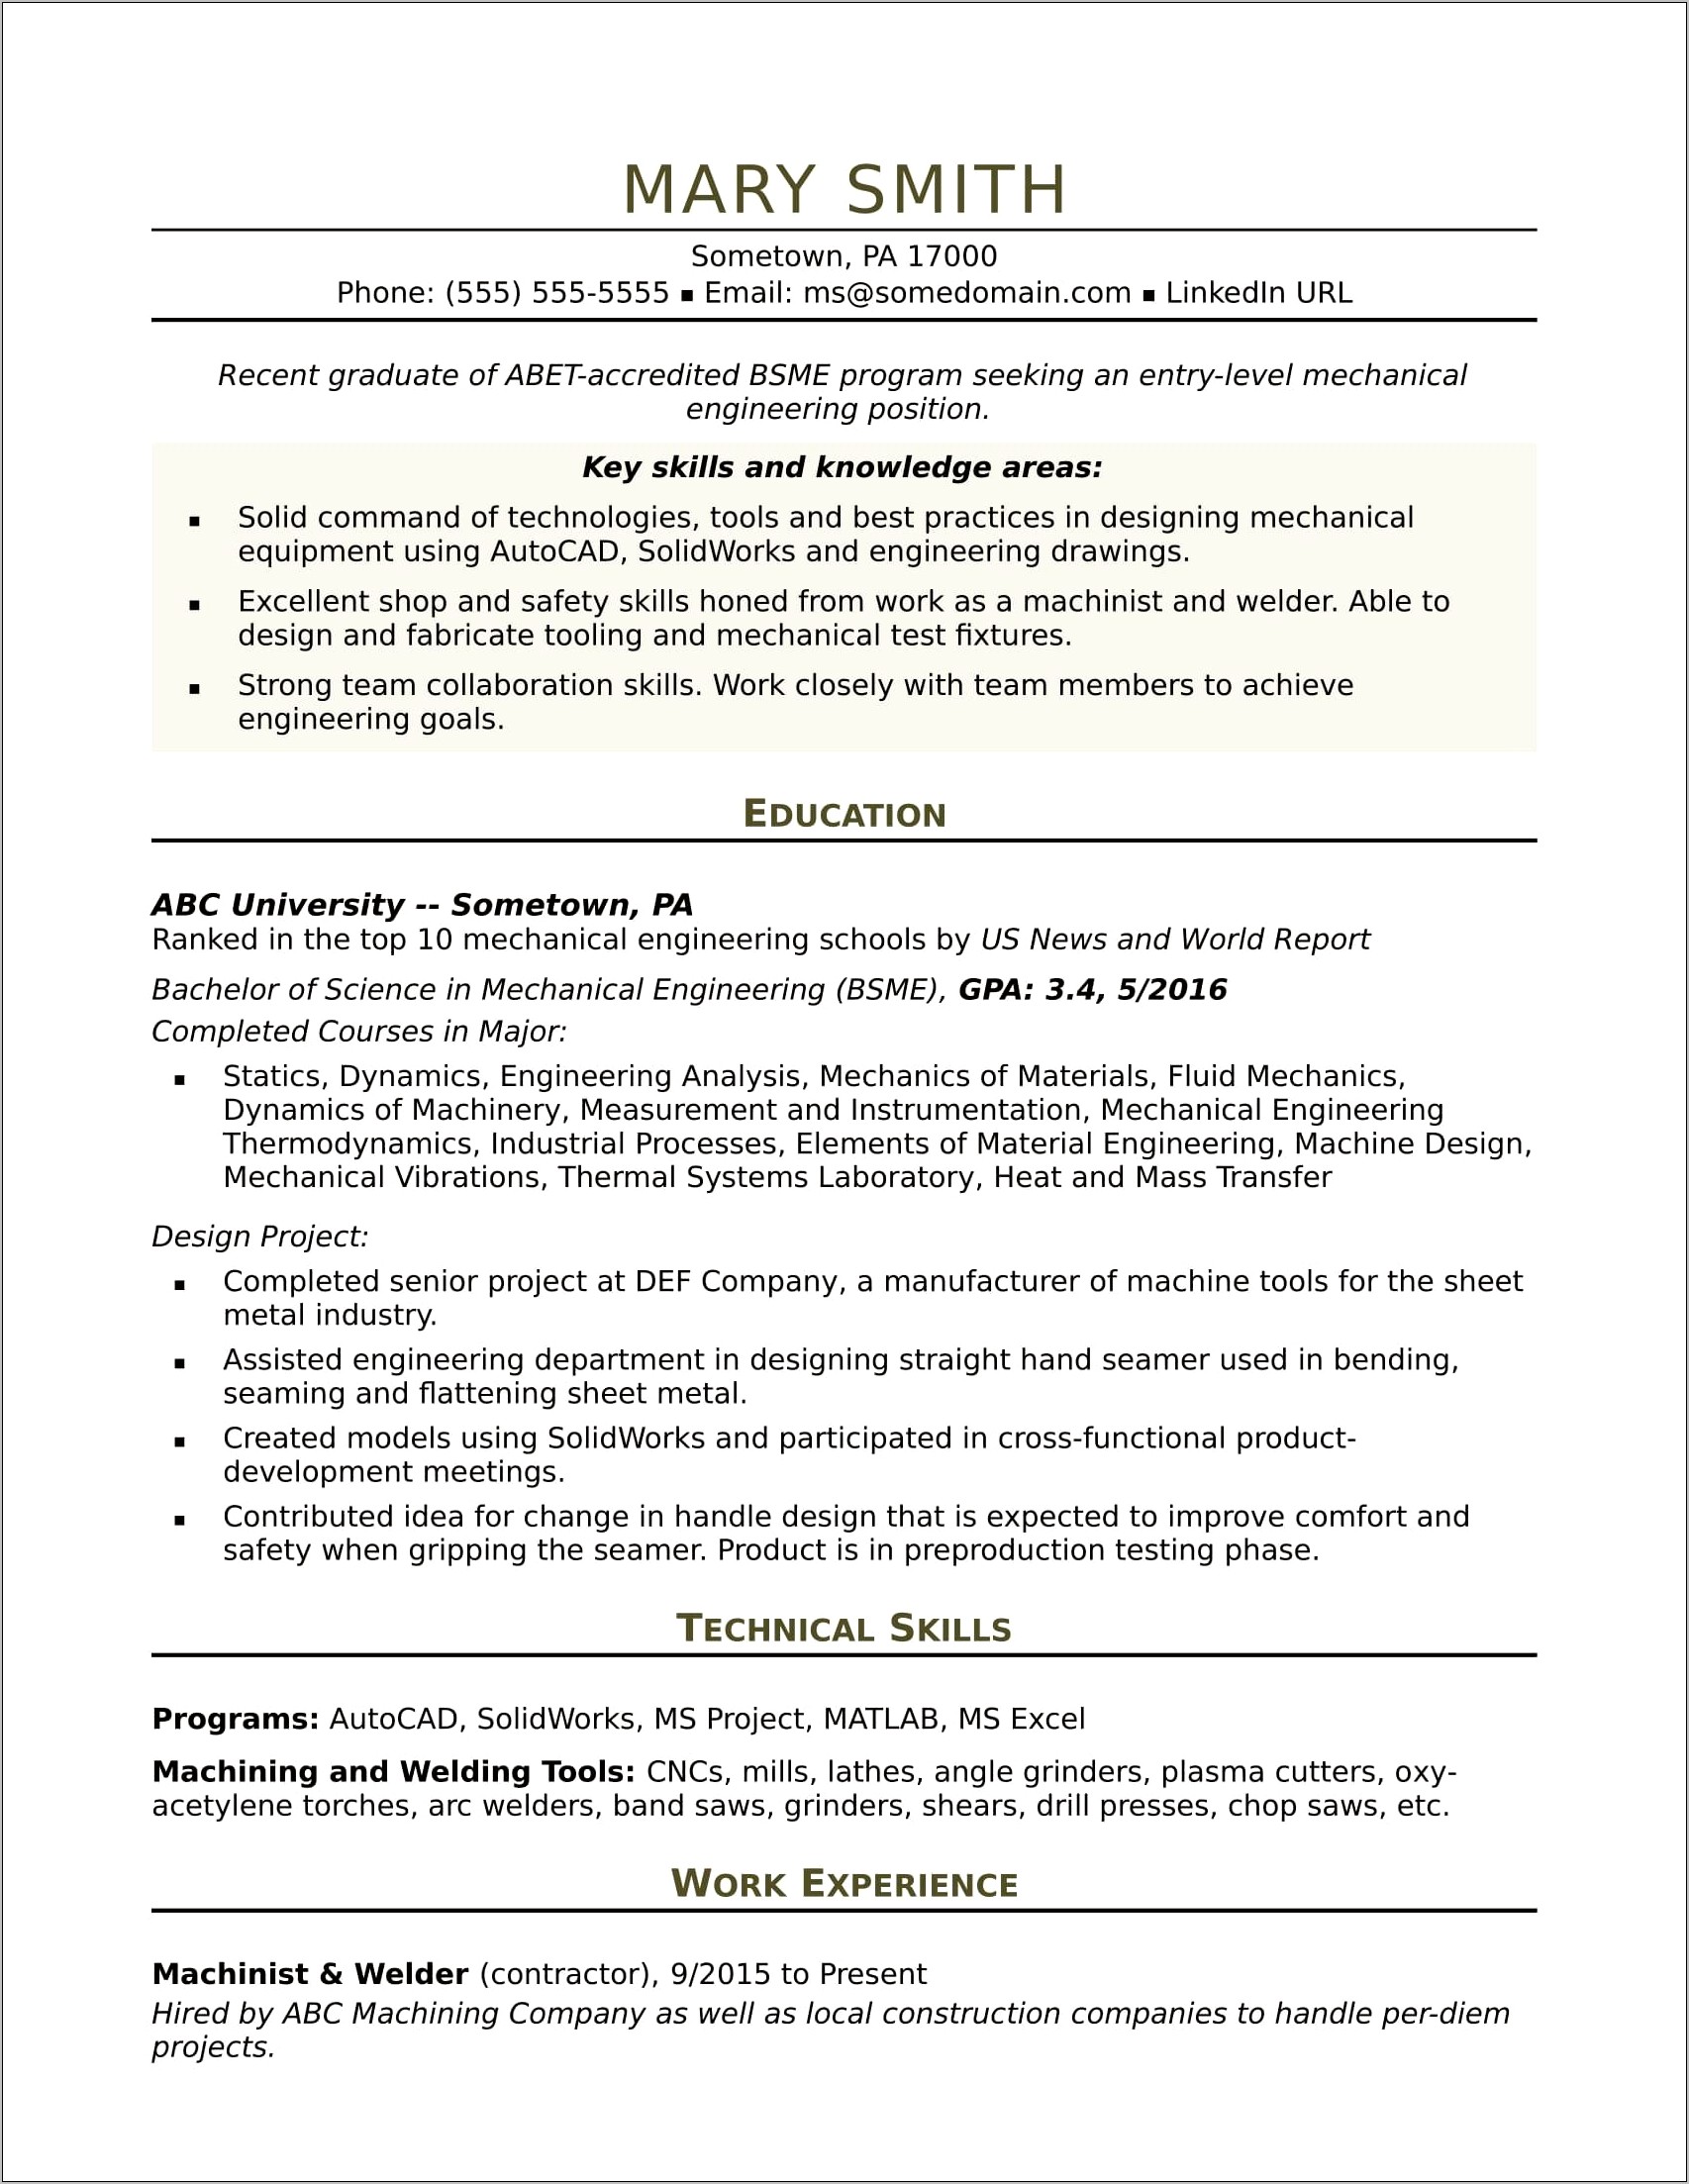 Resume Examples 2019 For Mechanical Engineers